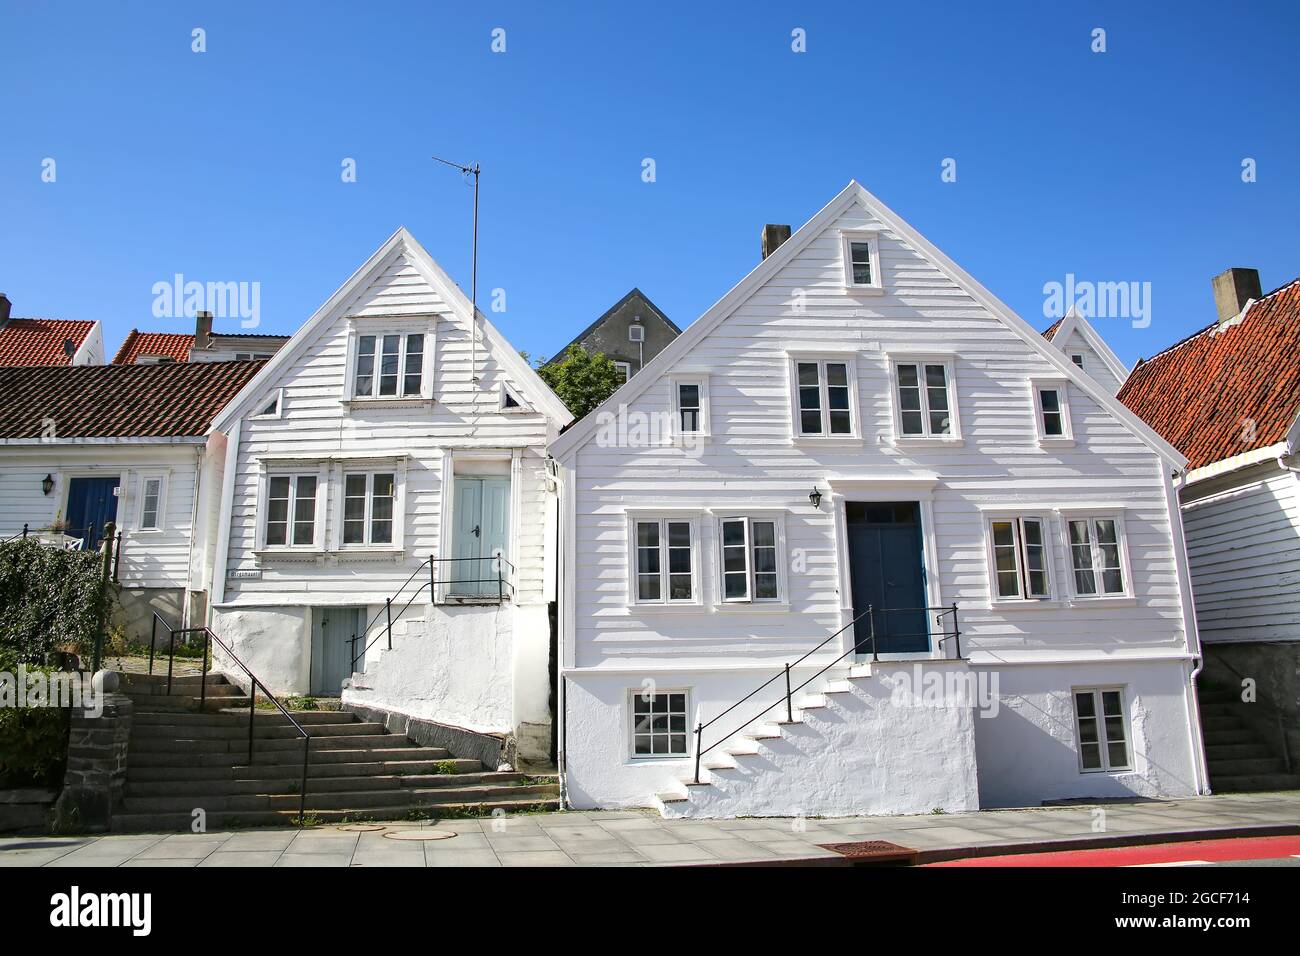 Traditional wooden homes which are all painted white with red roofs. Located in Gamle Stavanger, a historic area of the city of Stavanger, Norway. Stock Photo